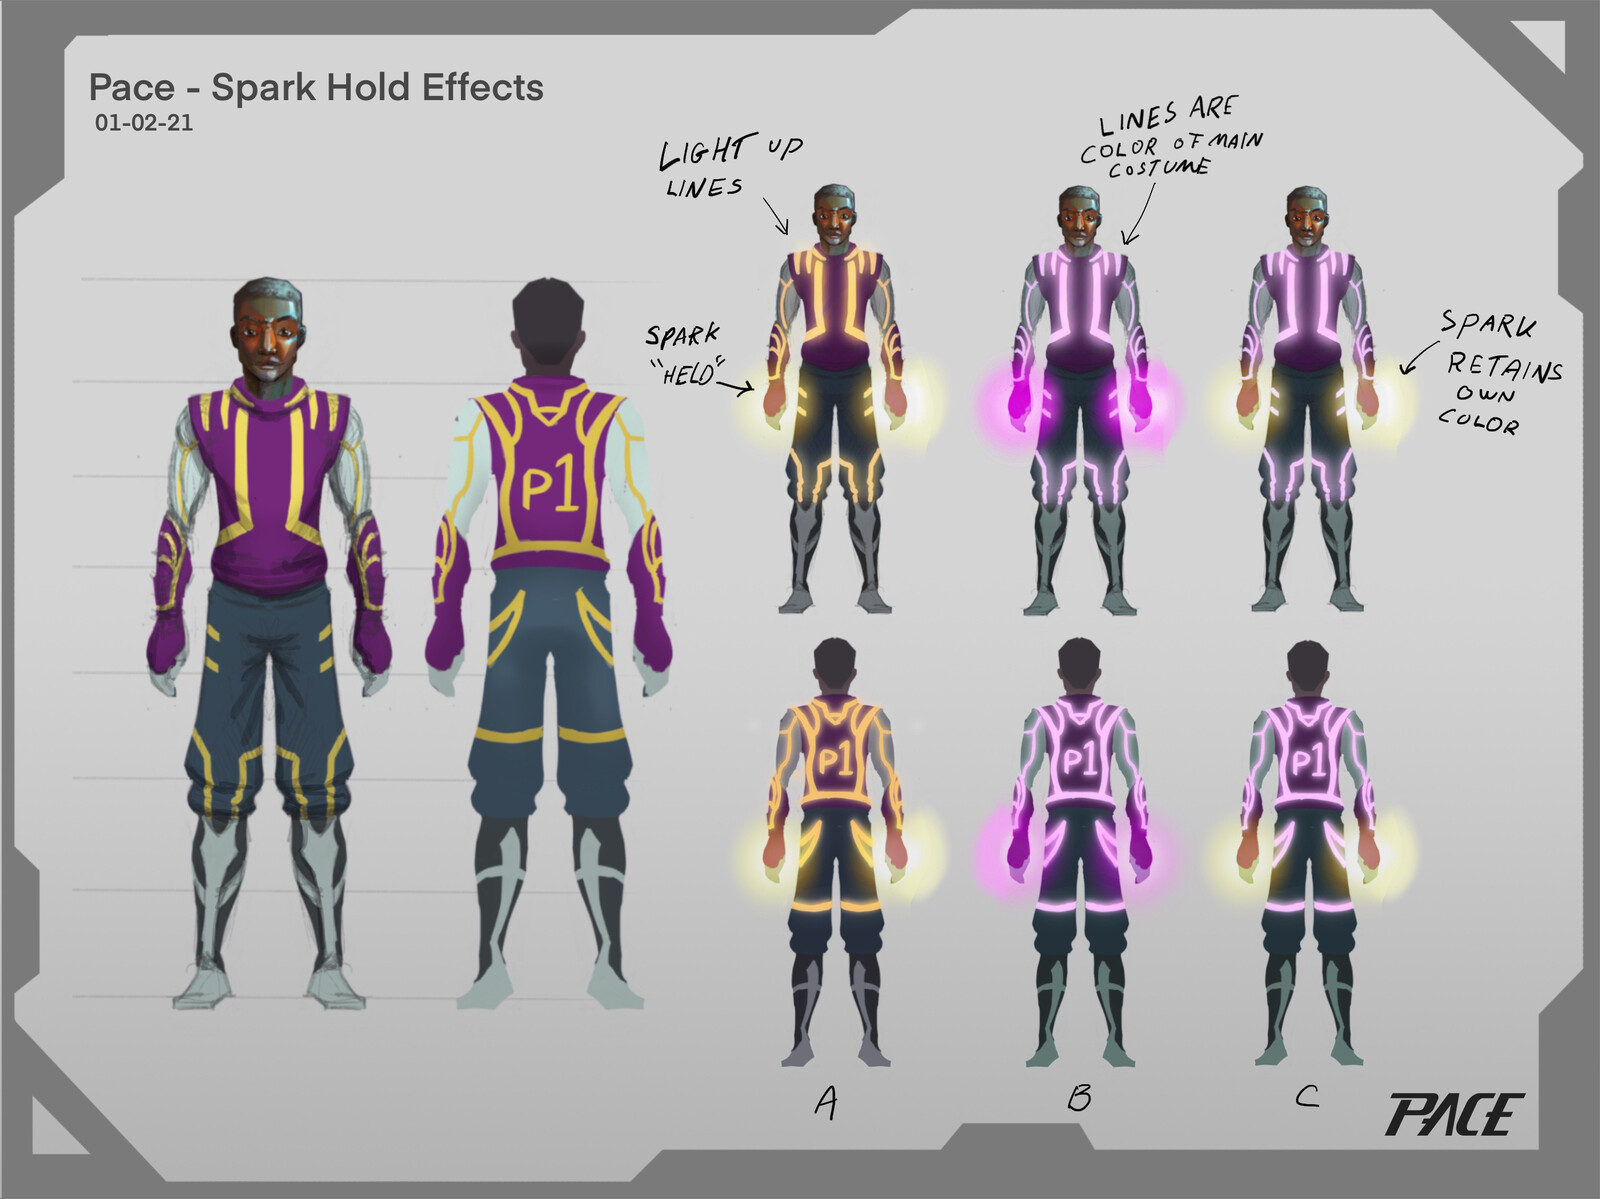 When a player gets a hold of the "Spark", they light up to become an easier target for the opponent.